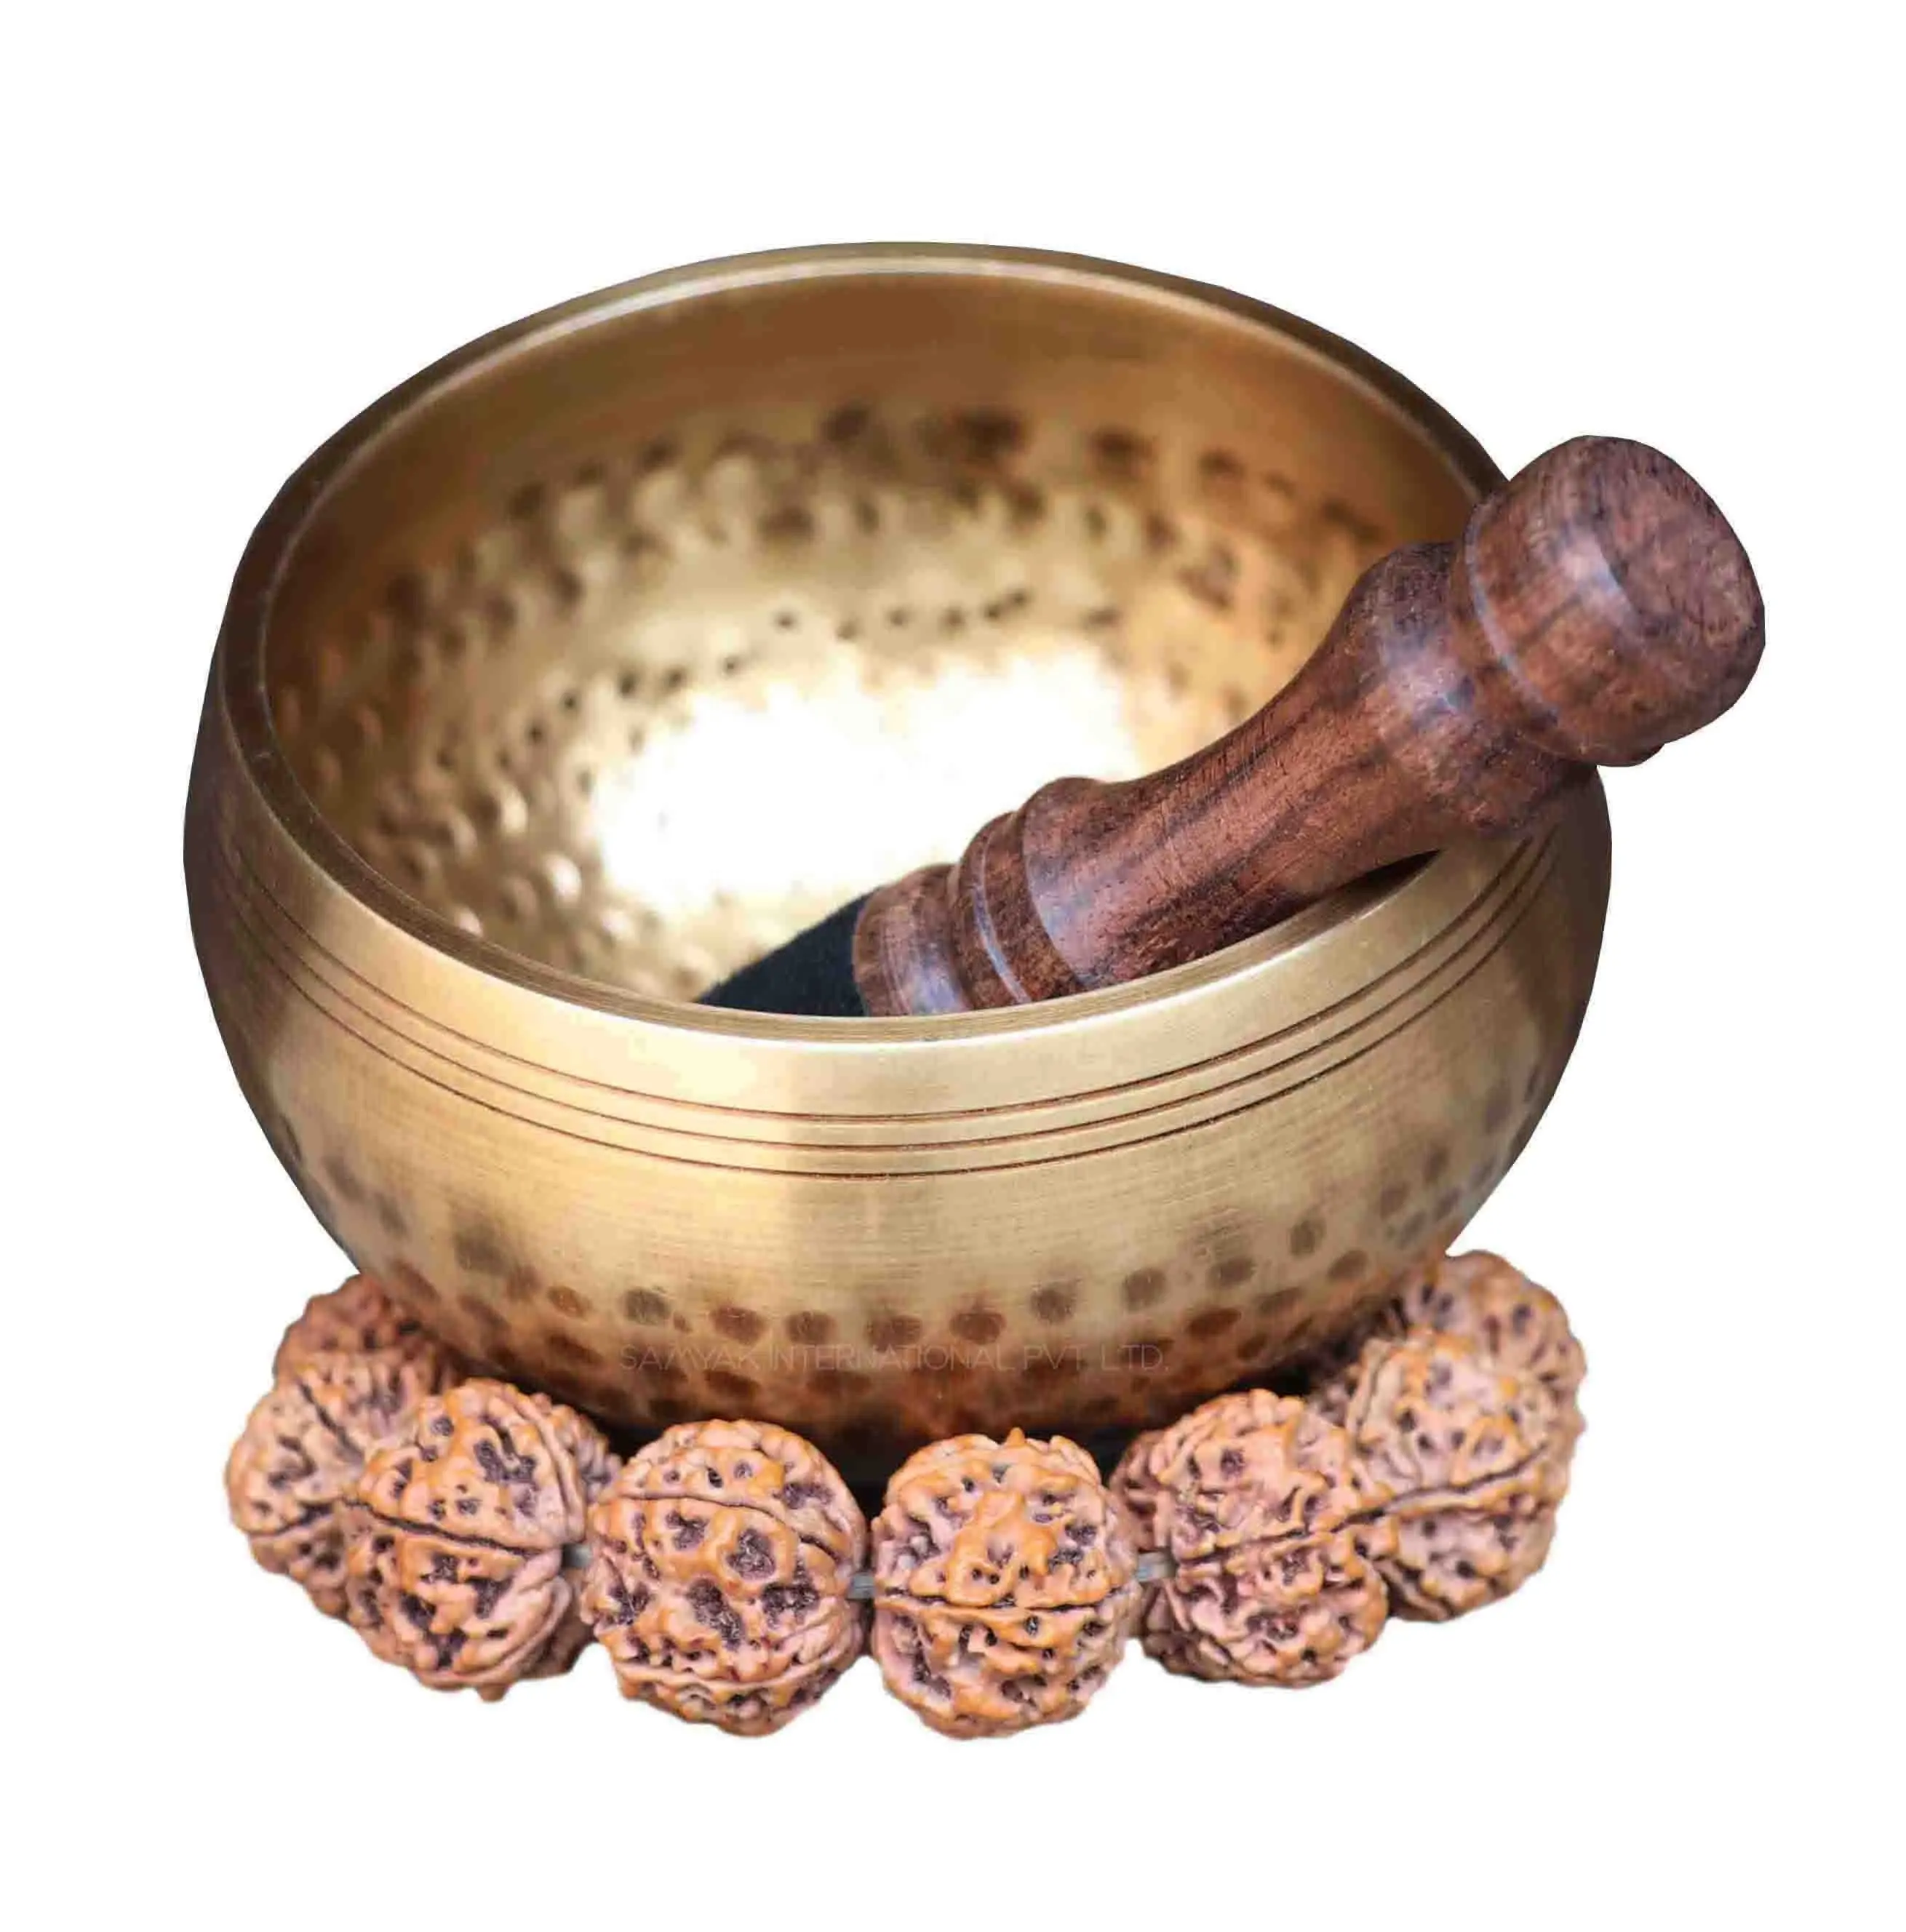 Nepal Made Tibetan Singing Bowl Hammered Meditation and Yoga Bowl for sound healing therapy